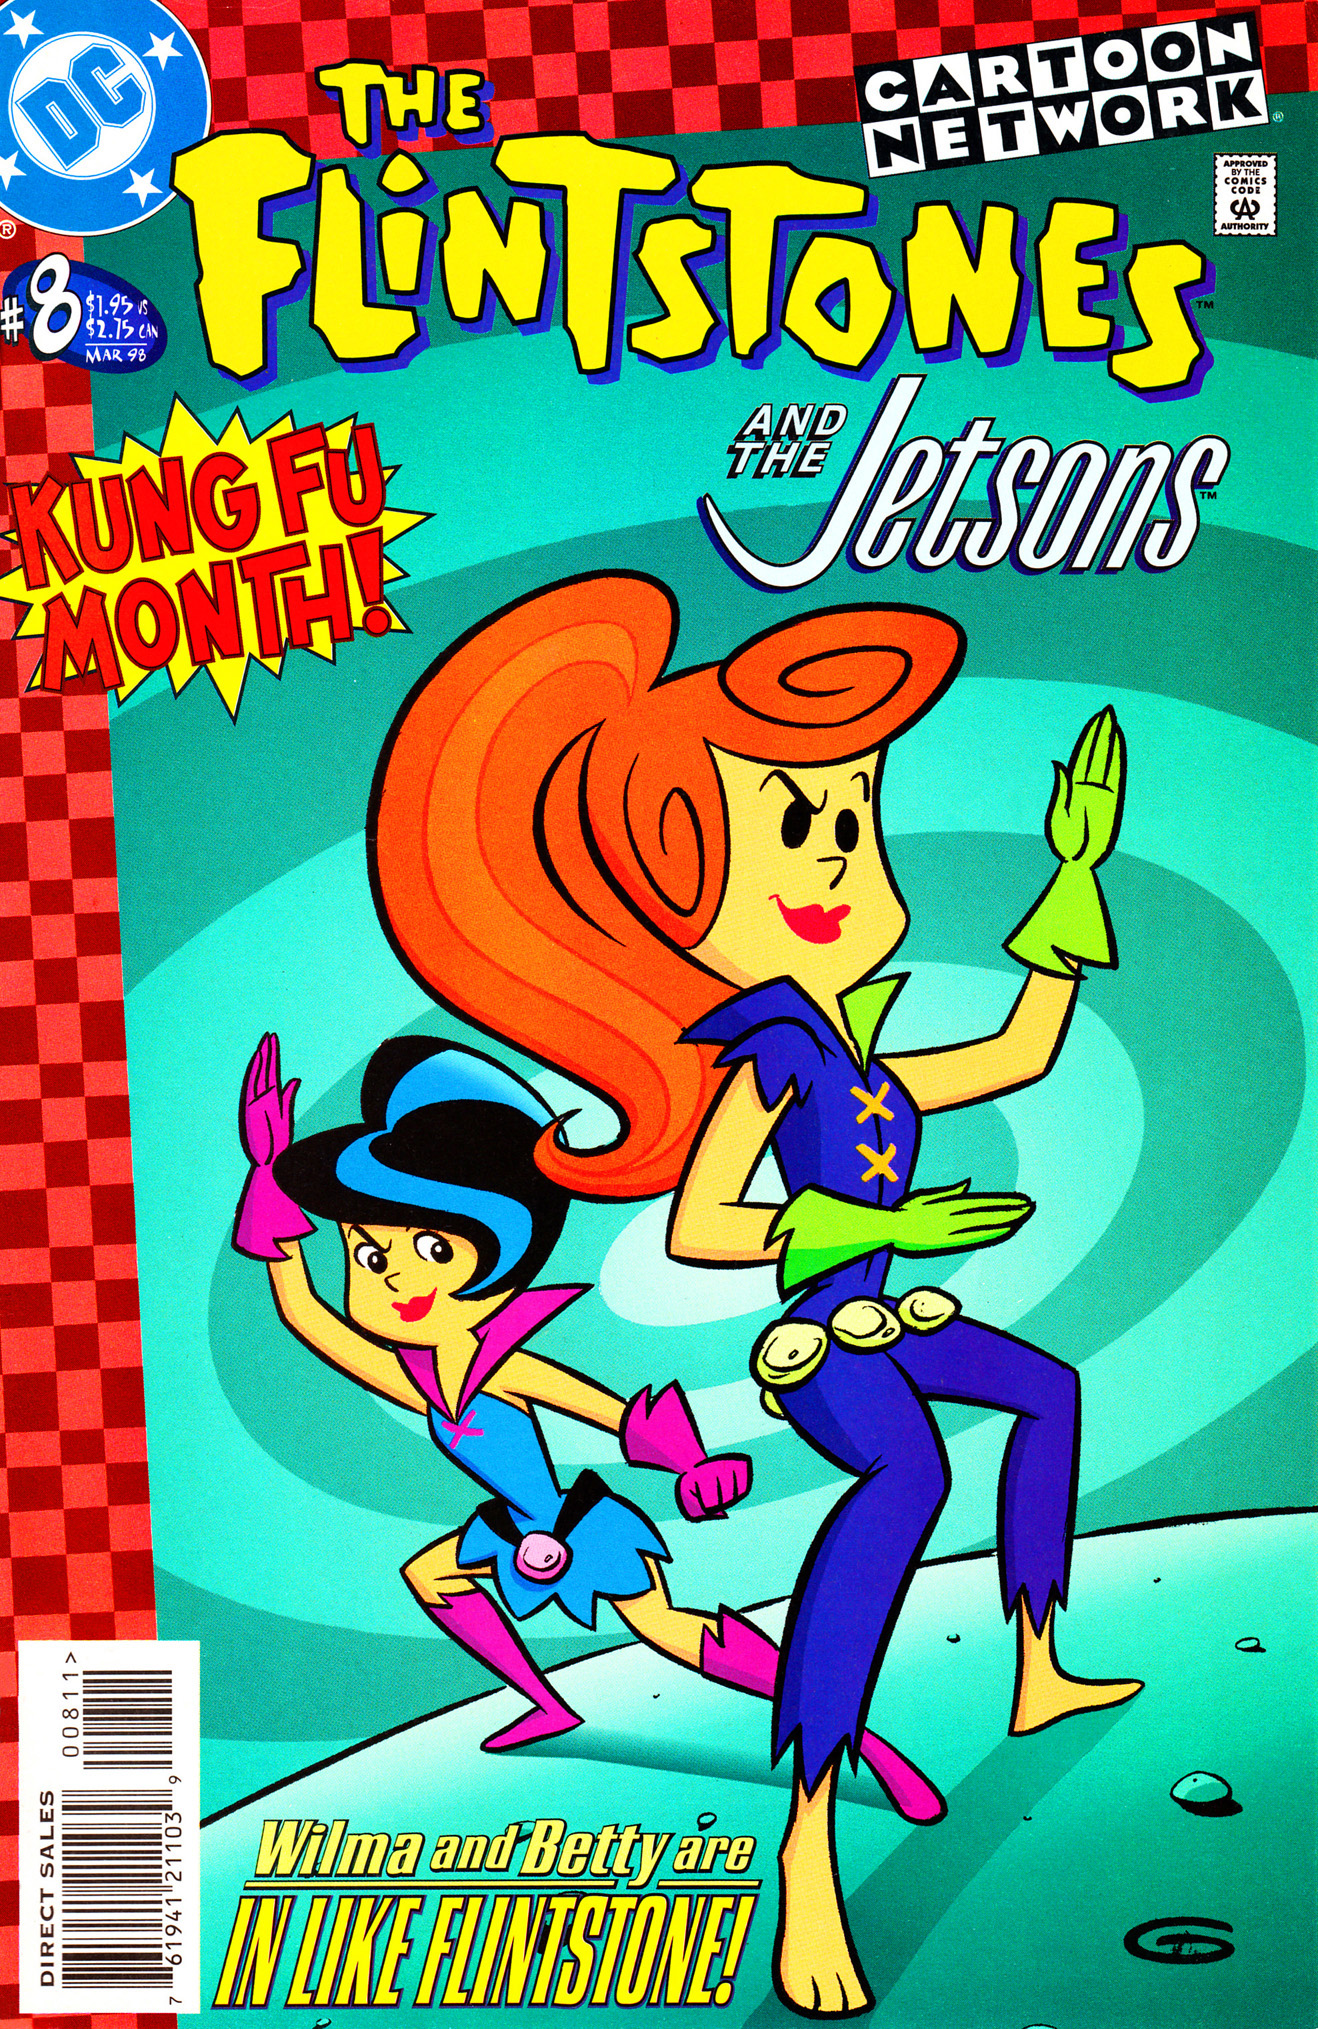 The Flintstones And The Jetsons Issue 8 | Read The Flintstones And The  Jetsons Issue 8 comic online in high quality. Read Full Comic online for  free - Read comics online in